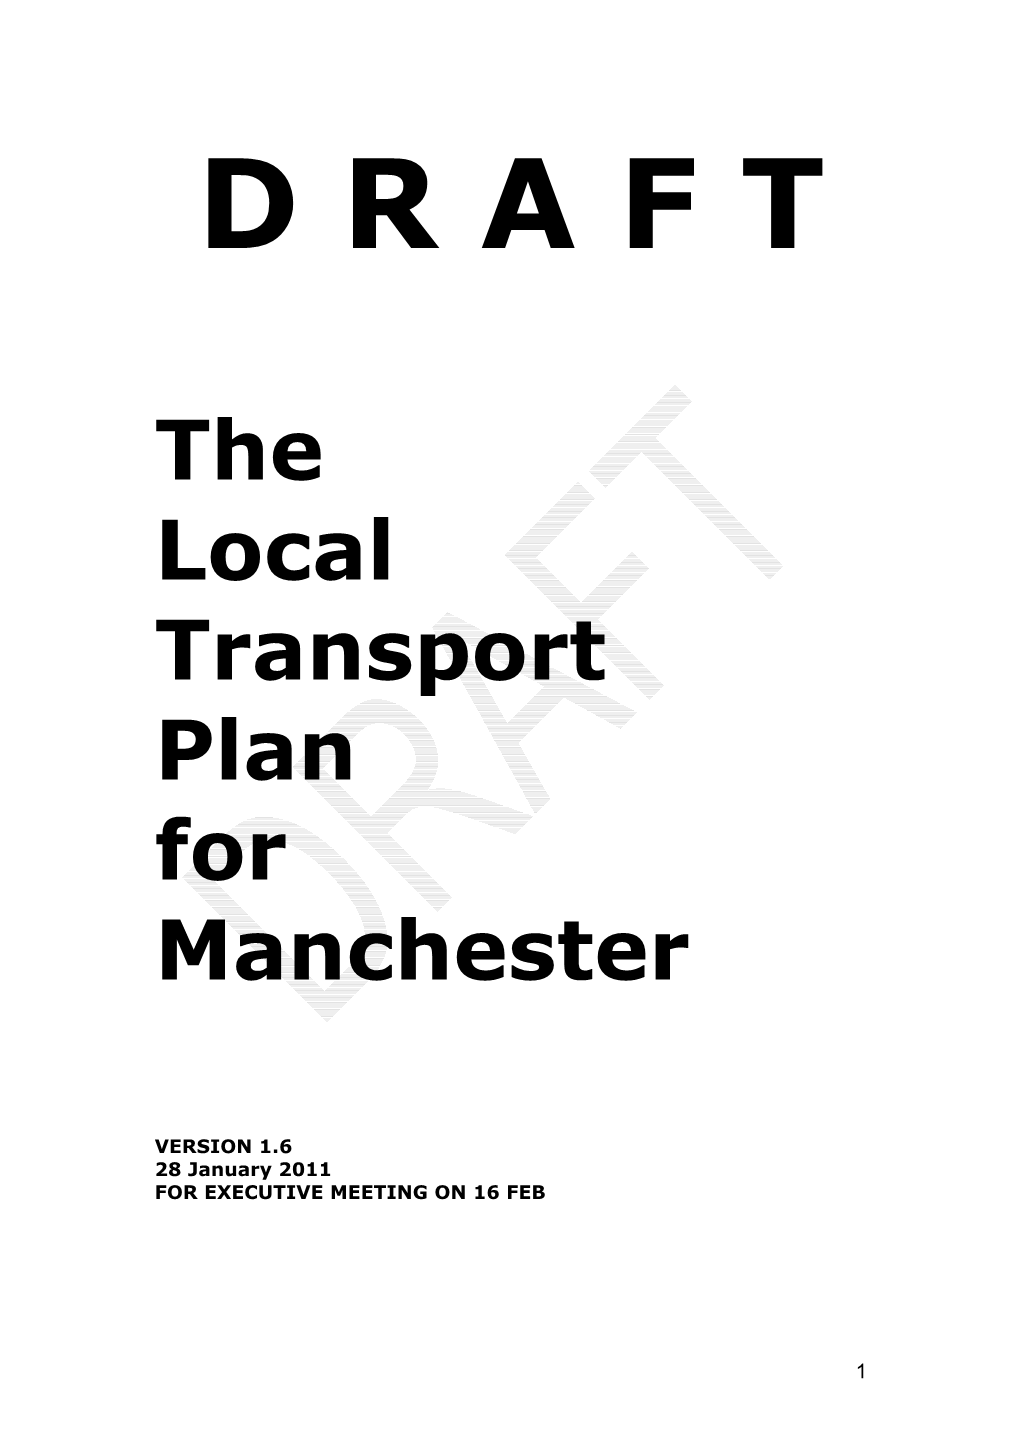 DRAFT the Local Transport Plan for Manchester